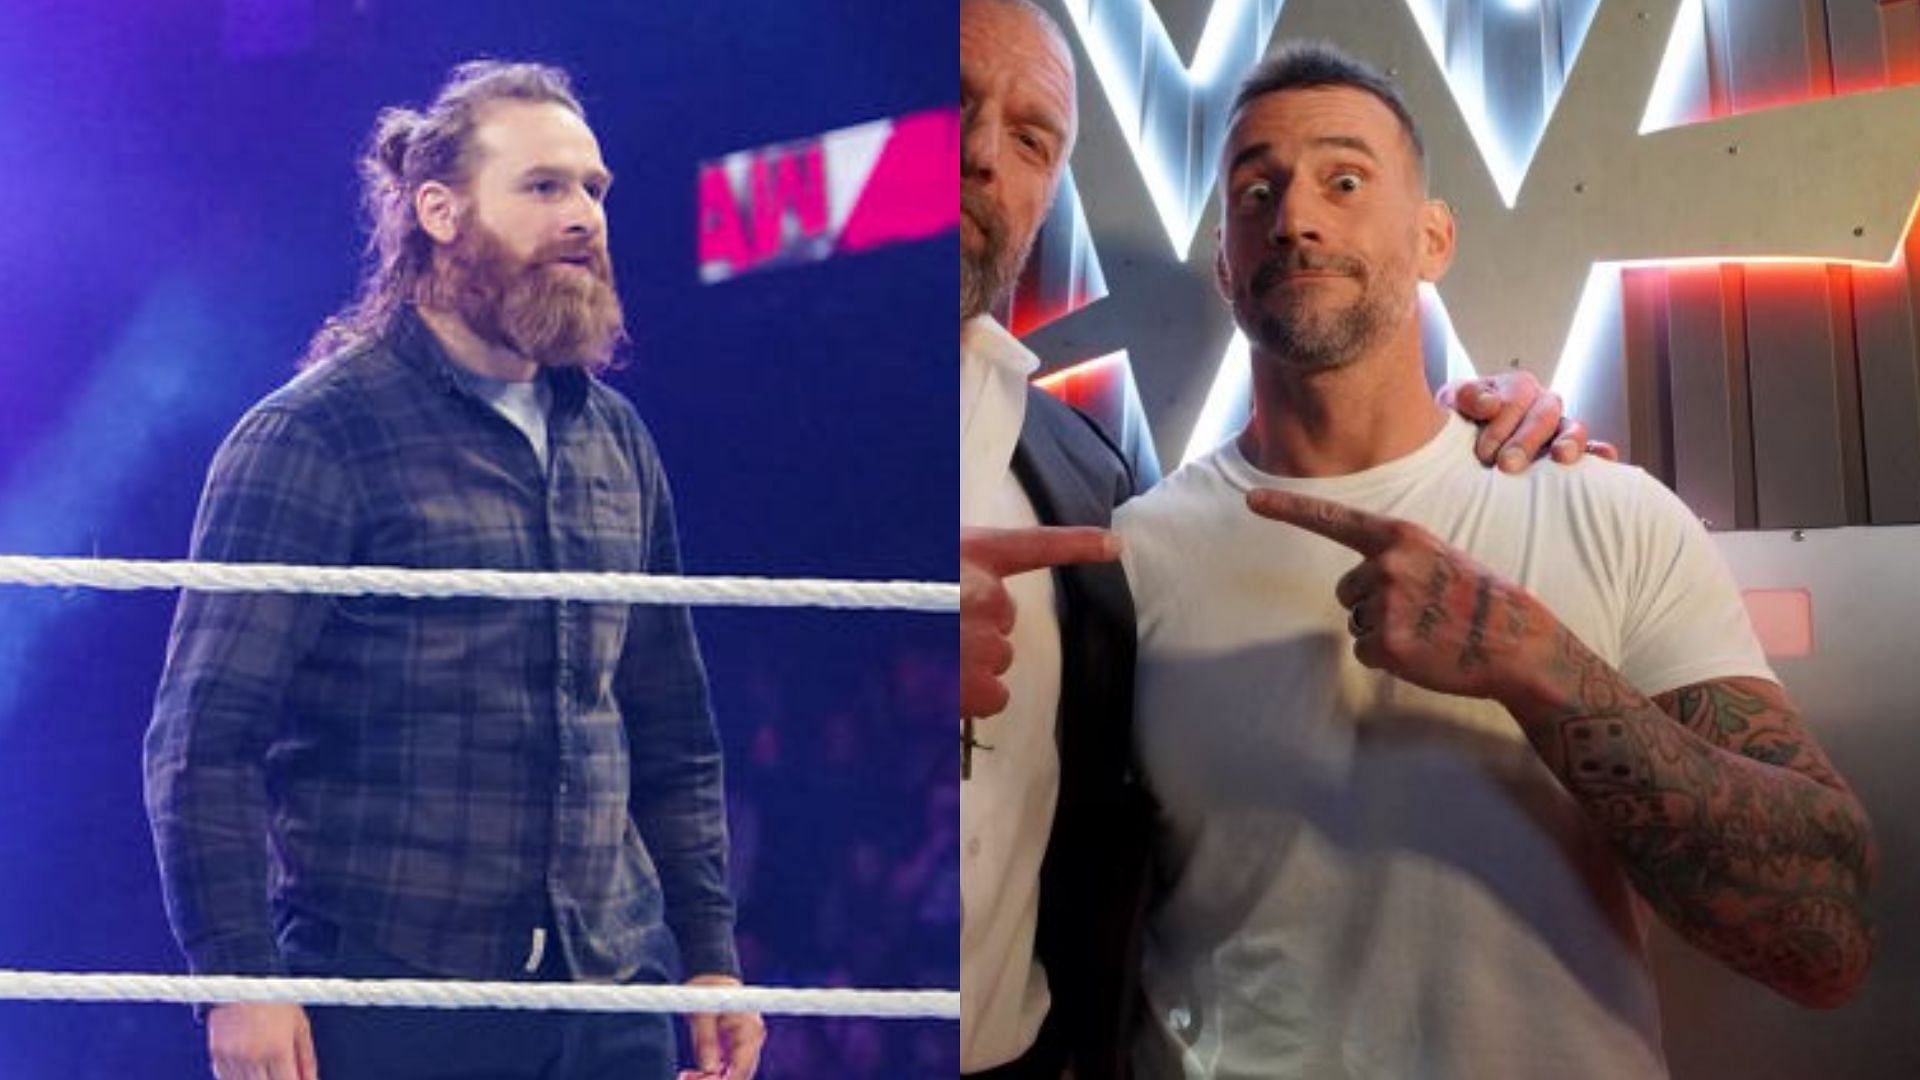 Zayn and Punk have never competed against each other in WWE or elsewhere.